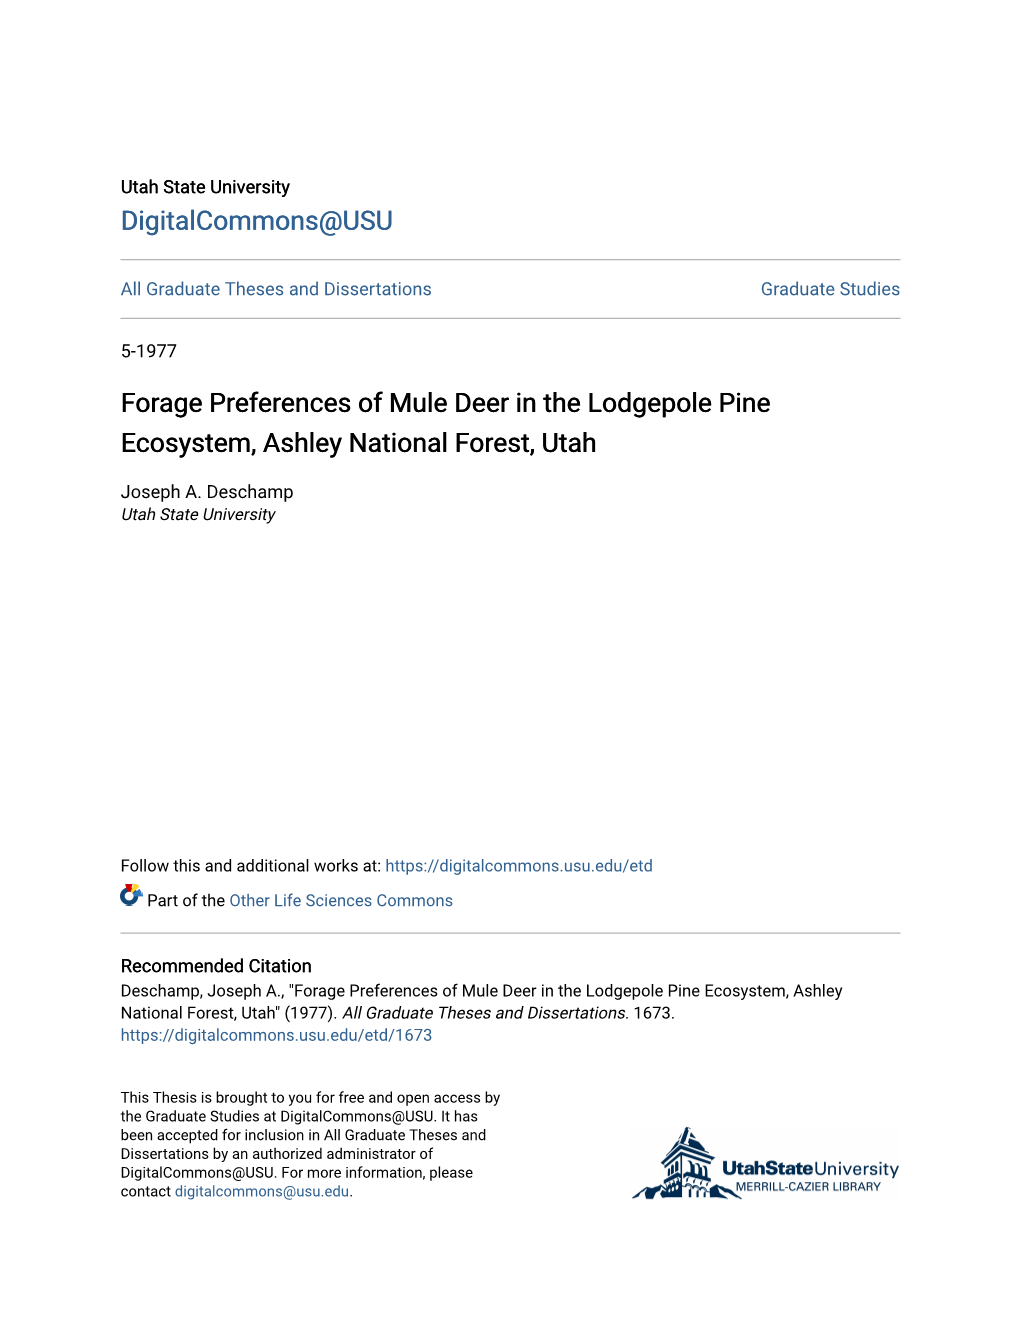 Forage Preferences of Mule Deer in the Lodgepole Pine Ecosystem, Ashley National Forest, Utah